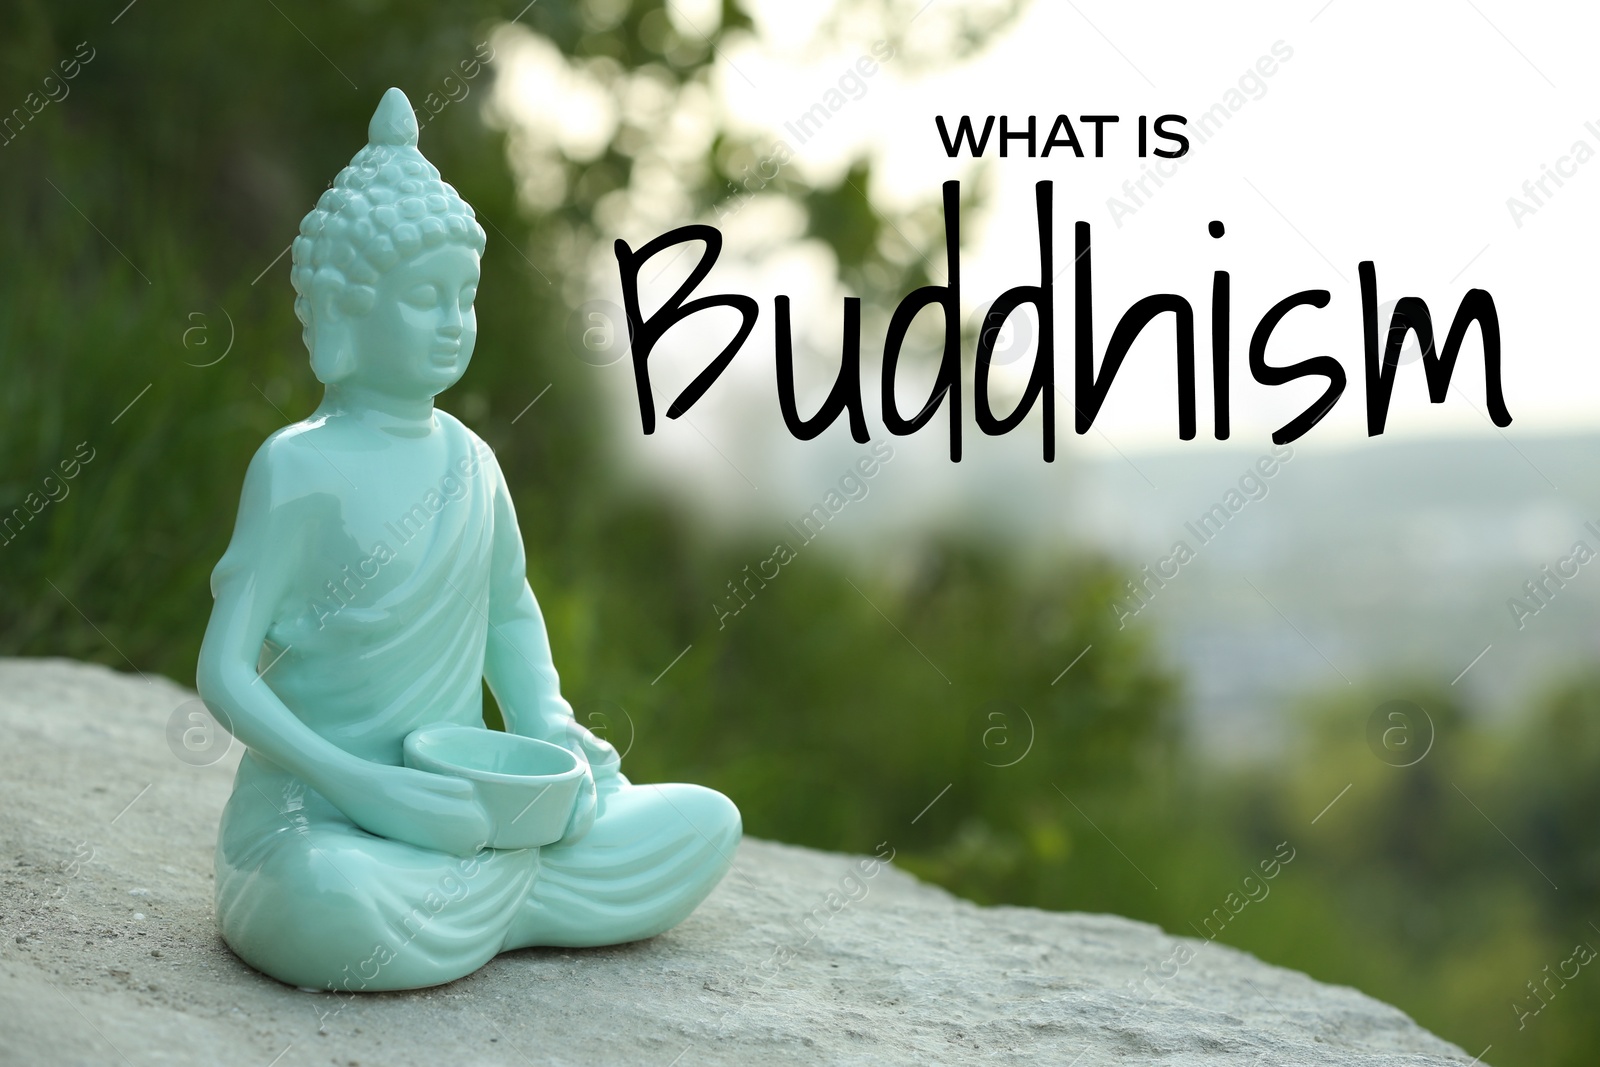 Image of Decorative Buddha statue on stone outdoors and text What Is Buddhism